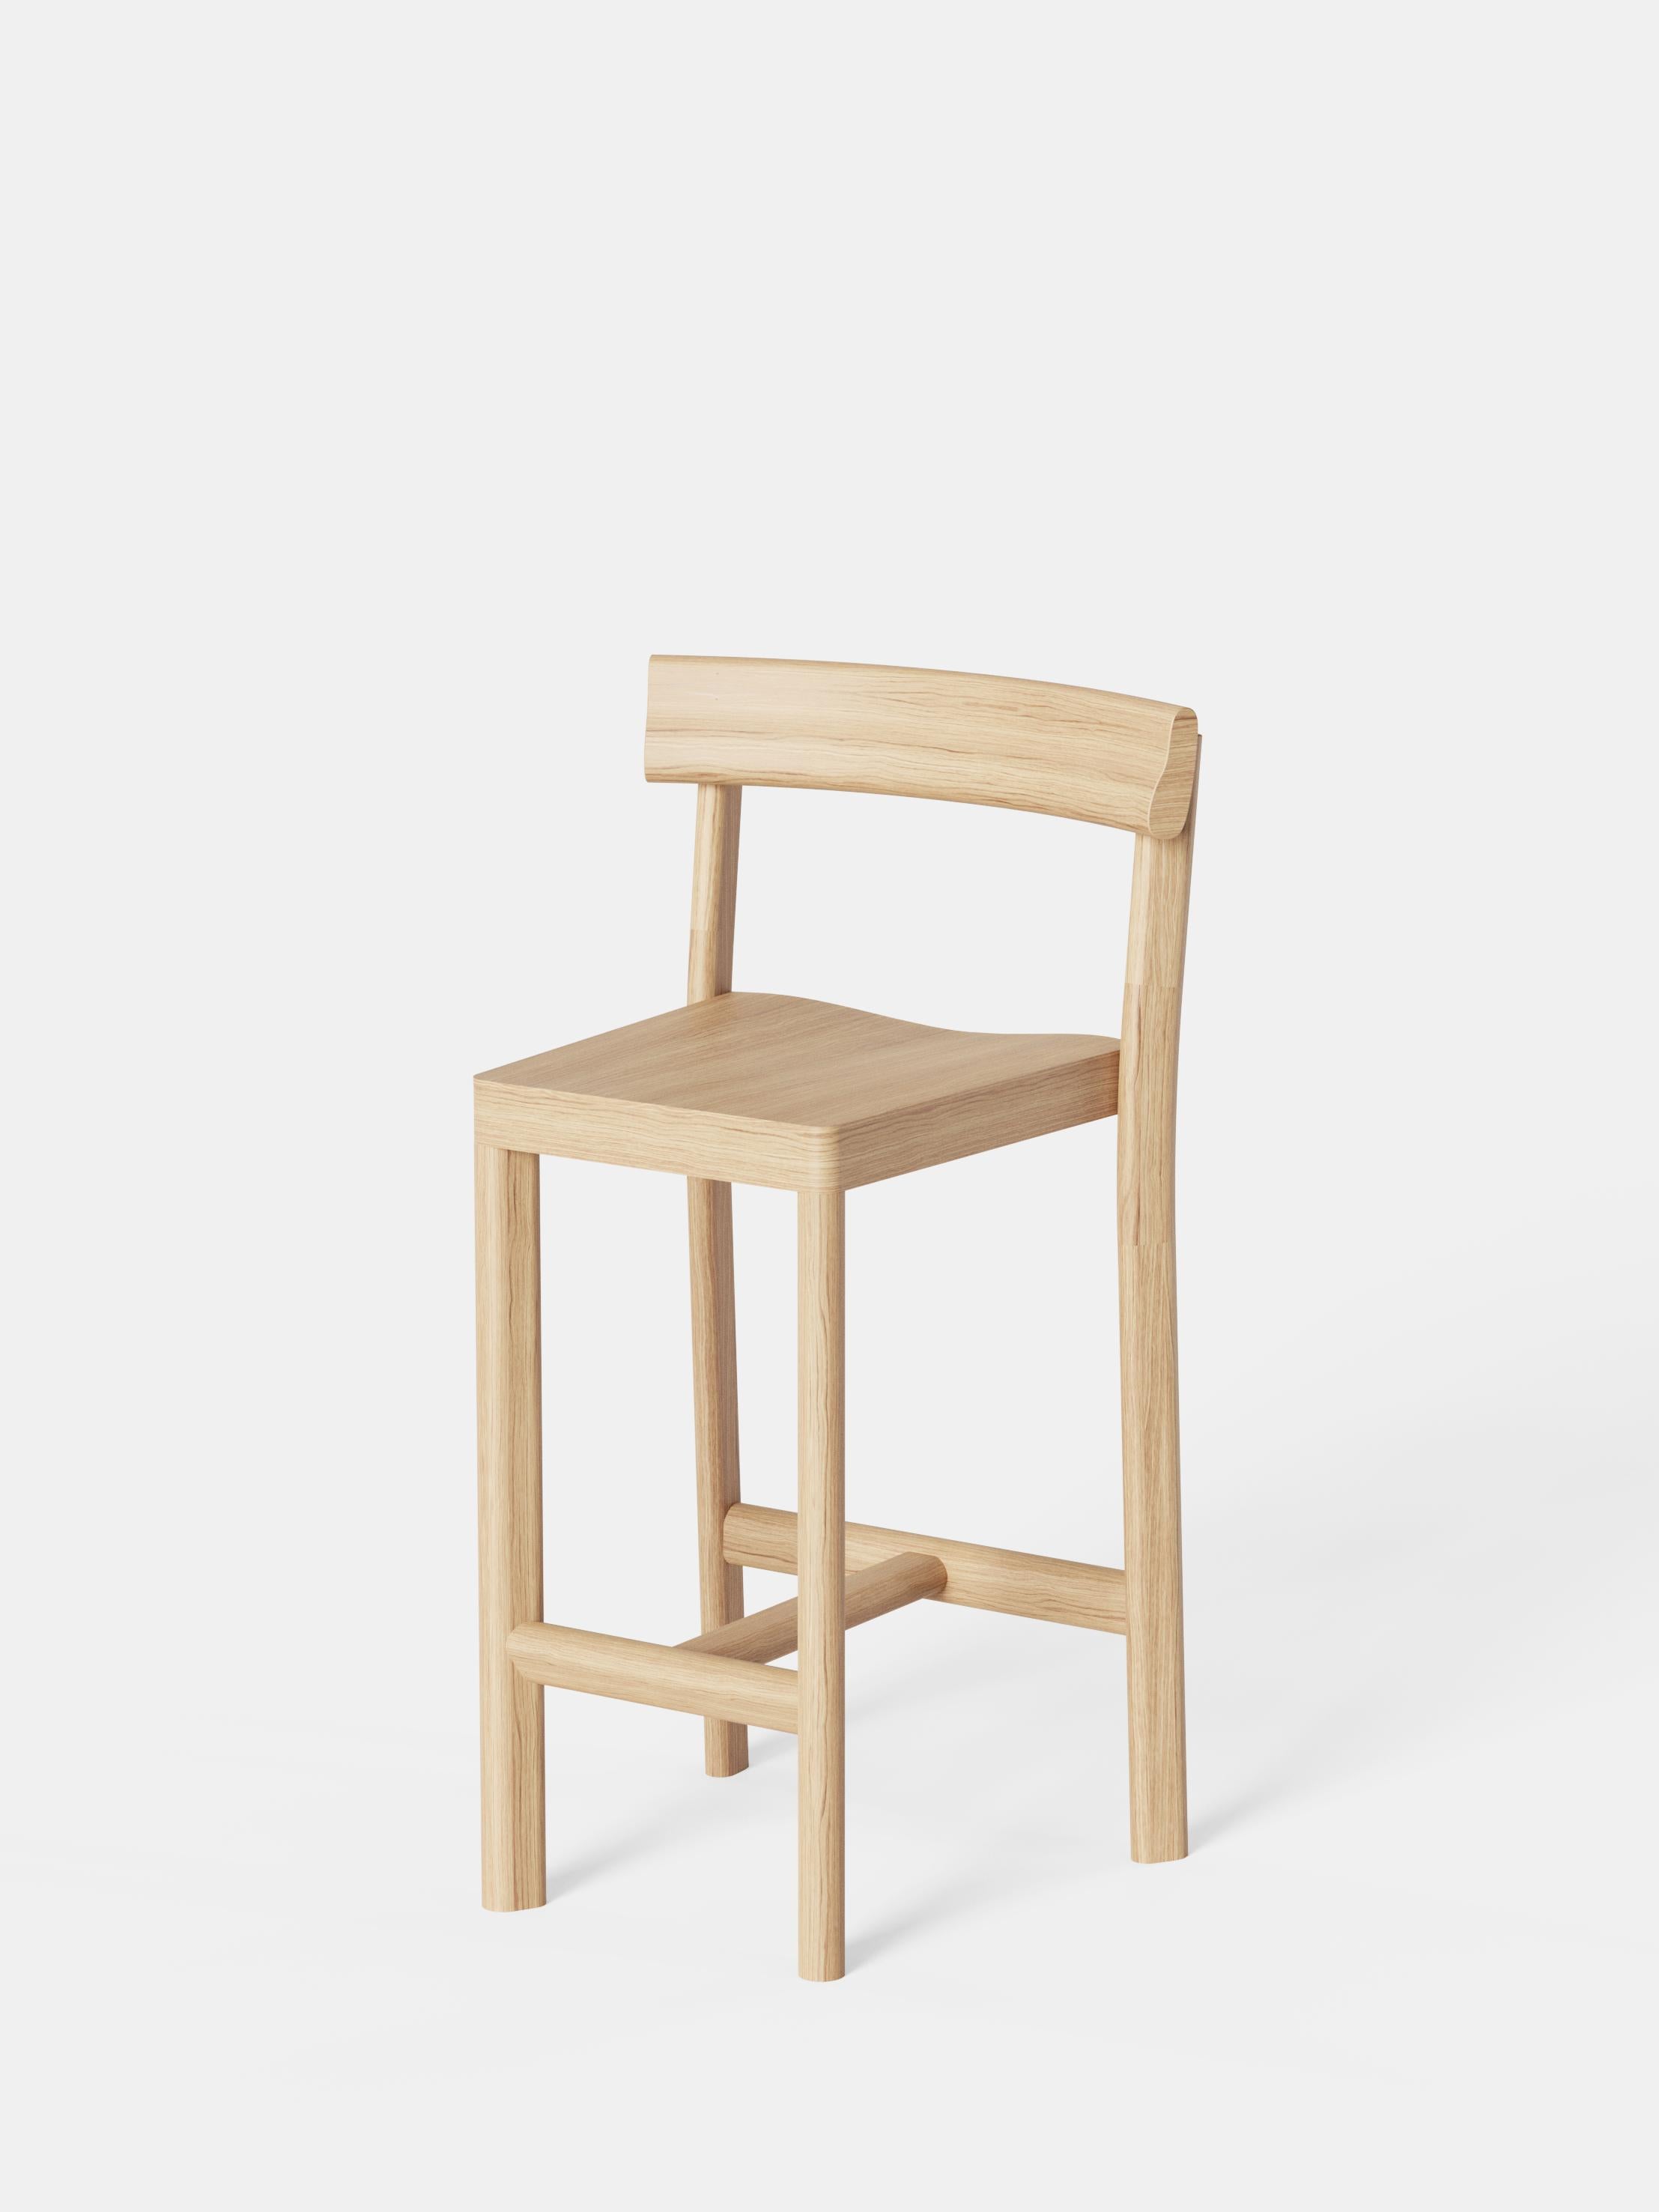 Set of 6 Galta 65 Oak Counter Chairs by Kann Design
Dimensions: D 50 x W 43 x H 91.5 cm.
Materials: Natural oak.
Available in other colors.

The Galta counter chair is the big sister of the classic Galta chair. The base stretches and reveals the